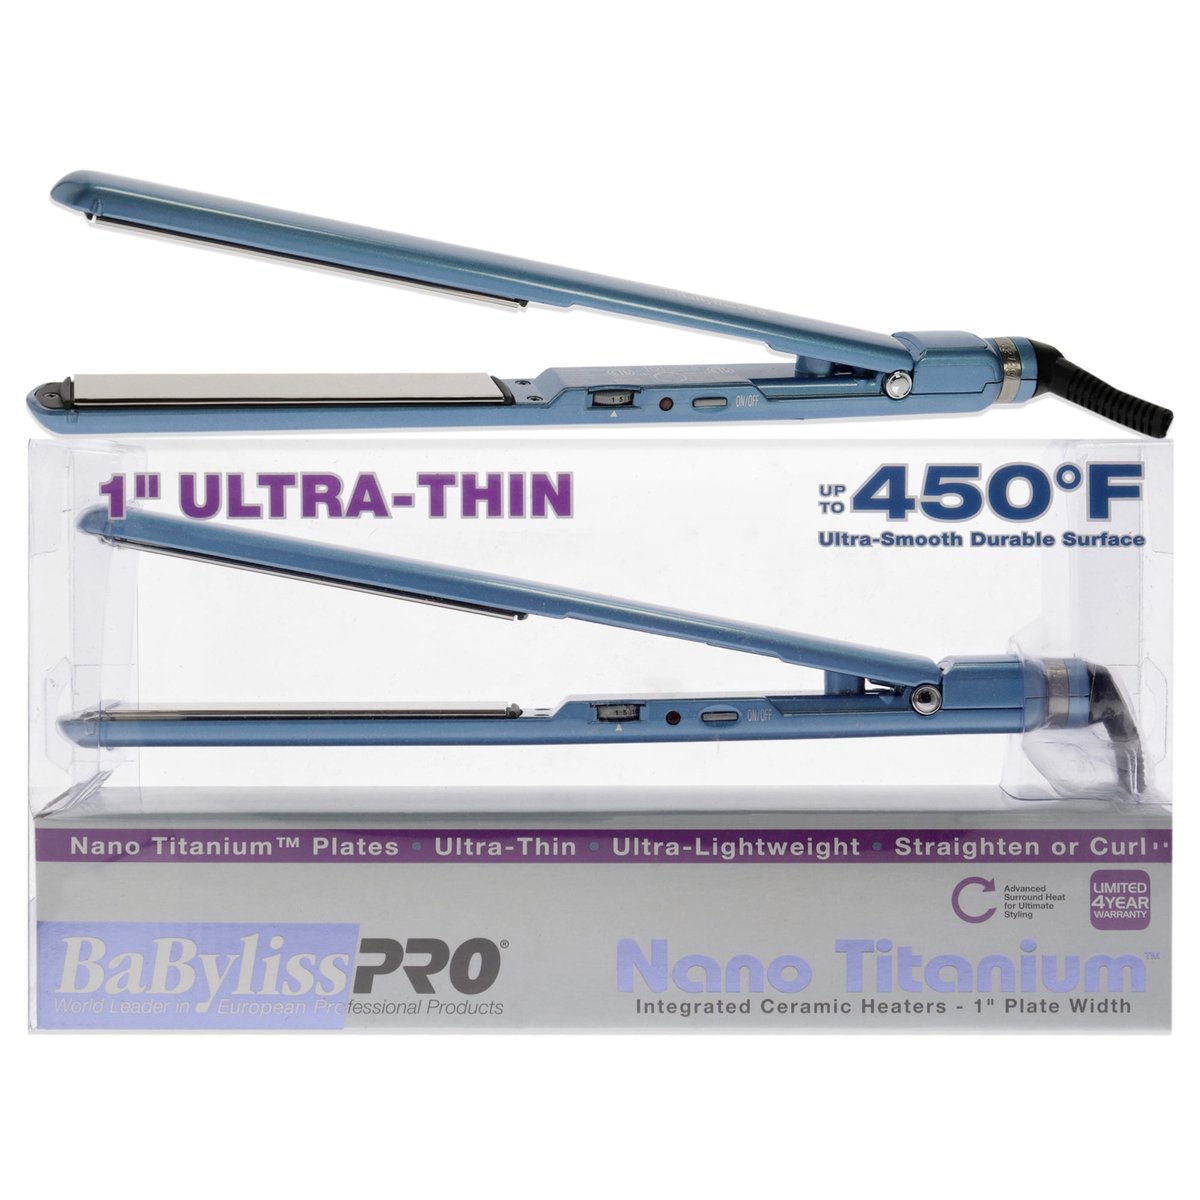 36% Off

BaBylissPRO Nano Titanium-Plated Ultra-Thin Straightening Iron     

goto.walmart.com/g1WL29

BwcDeals supports the ClearTheList Movement!